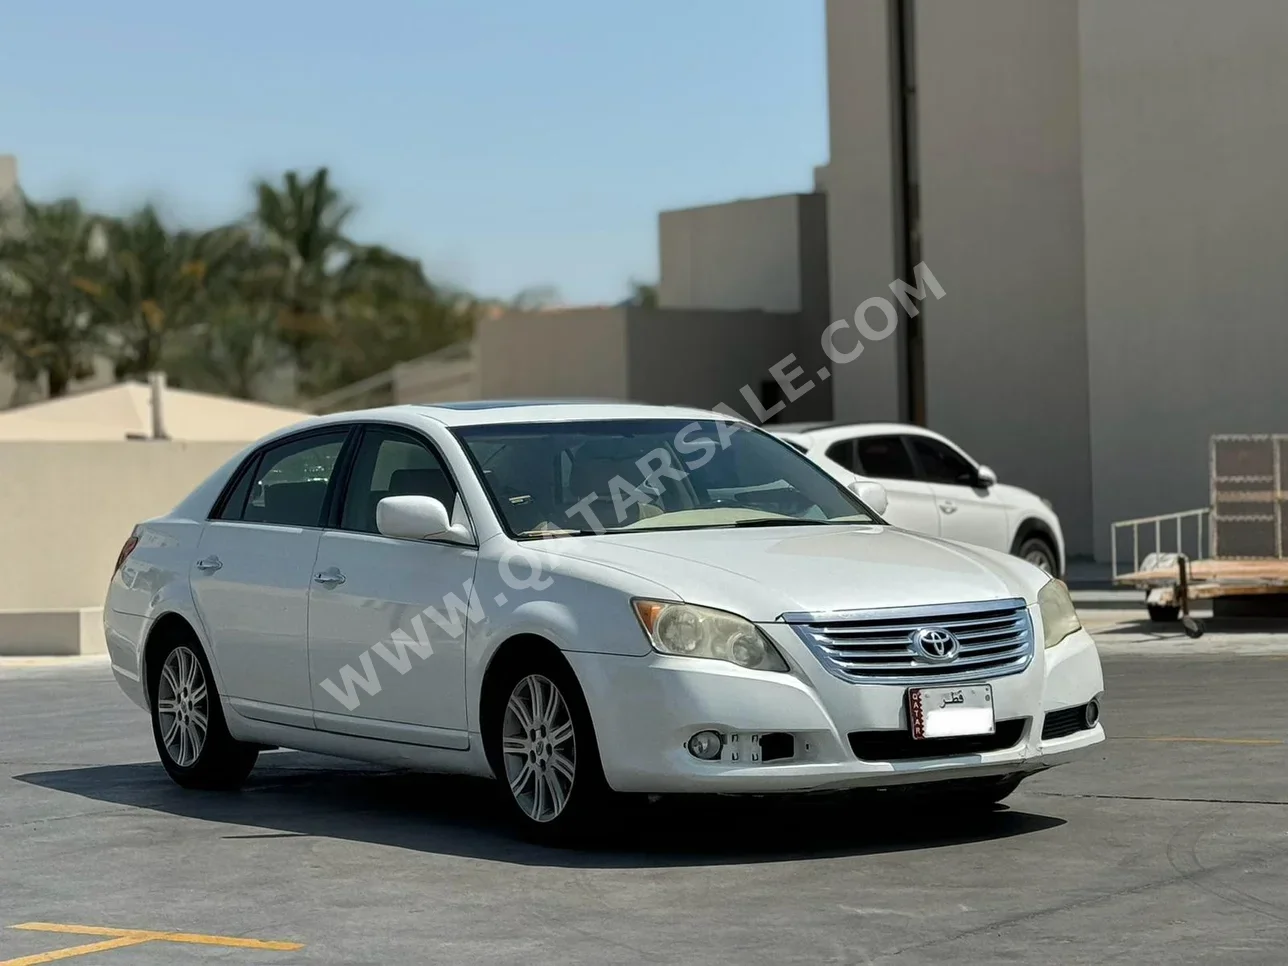 Toyota  Avalon  Limited  2008  Automatic  257,000 Km  6 Cylinder  Front Wheel Drive (FWD)  Sedan  White